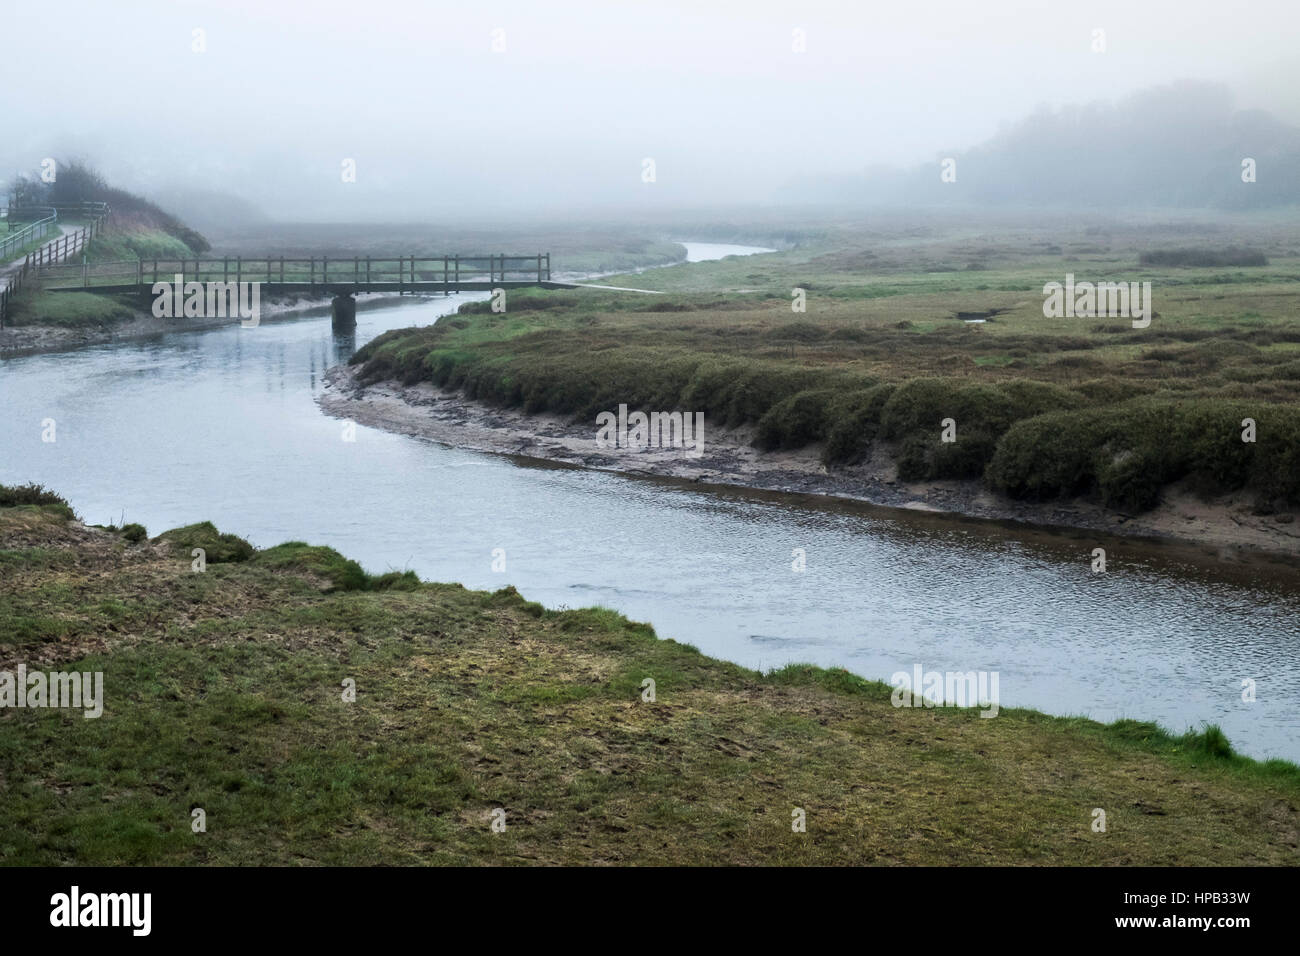 UK weather Misty day. Gannel Estuary River Newquay Cornwall Stock Photo